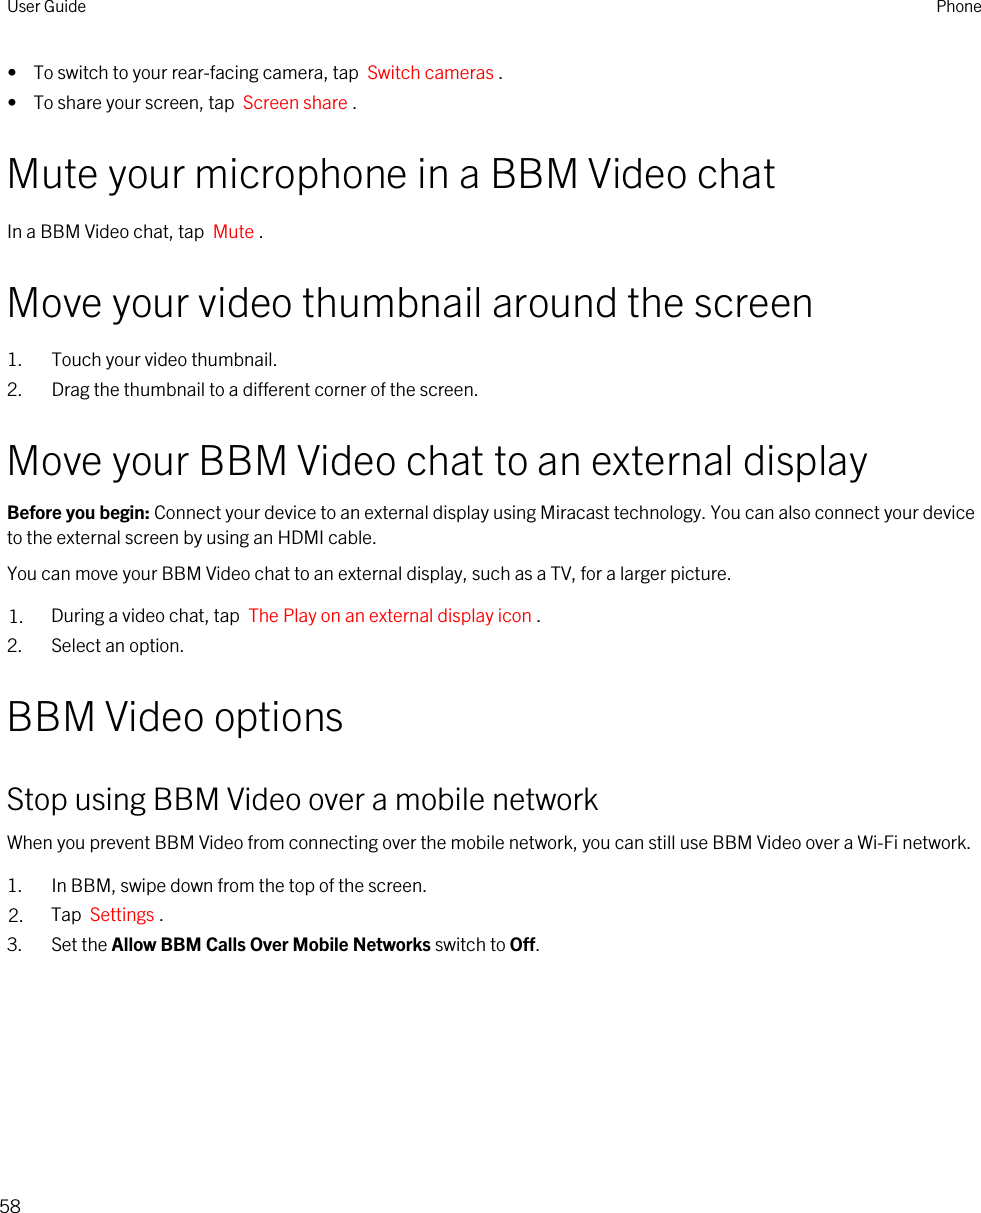 •  To switch to your rear-facing camera, tap  Switch cameras .•  To share your screen, tap  Screen share .Mute your microphone in a BBM Video chatIn a BBM Video chat, tap  Mute .Move your video thumbnail around the screen1. Touch your video thumbnail.2. Drag the thumbnail to a different corner of the screen.Move your BBM Video chat to an external displayBefore you begin: Connect your device to an external display using Miracast technology. You can also connect your device to the external screen by using an HDMI cable.You can move your BBM Video chat to an external display, such as a TV, for a larger picture.1. During a video chat, tap  The Play on an external display icon .2. Select an option.BBM Video optionsStop using BBM Video over a mobile networkWhen you prevent BBM Video from connecting over the mobile network, you can still use BBM Video over a Wi-Fi network.1. In BBM, swipe down from the top of the screen.2. Tap  Settings .3. Set the Allow BBM Calls Over Mobile Networks switch to Off.User Guide Phone58